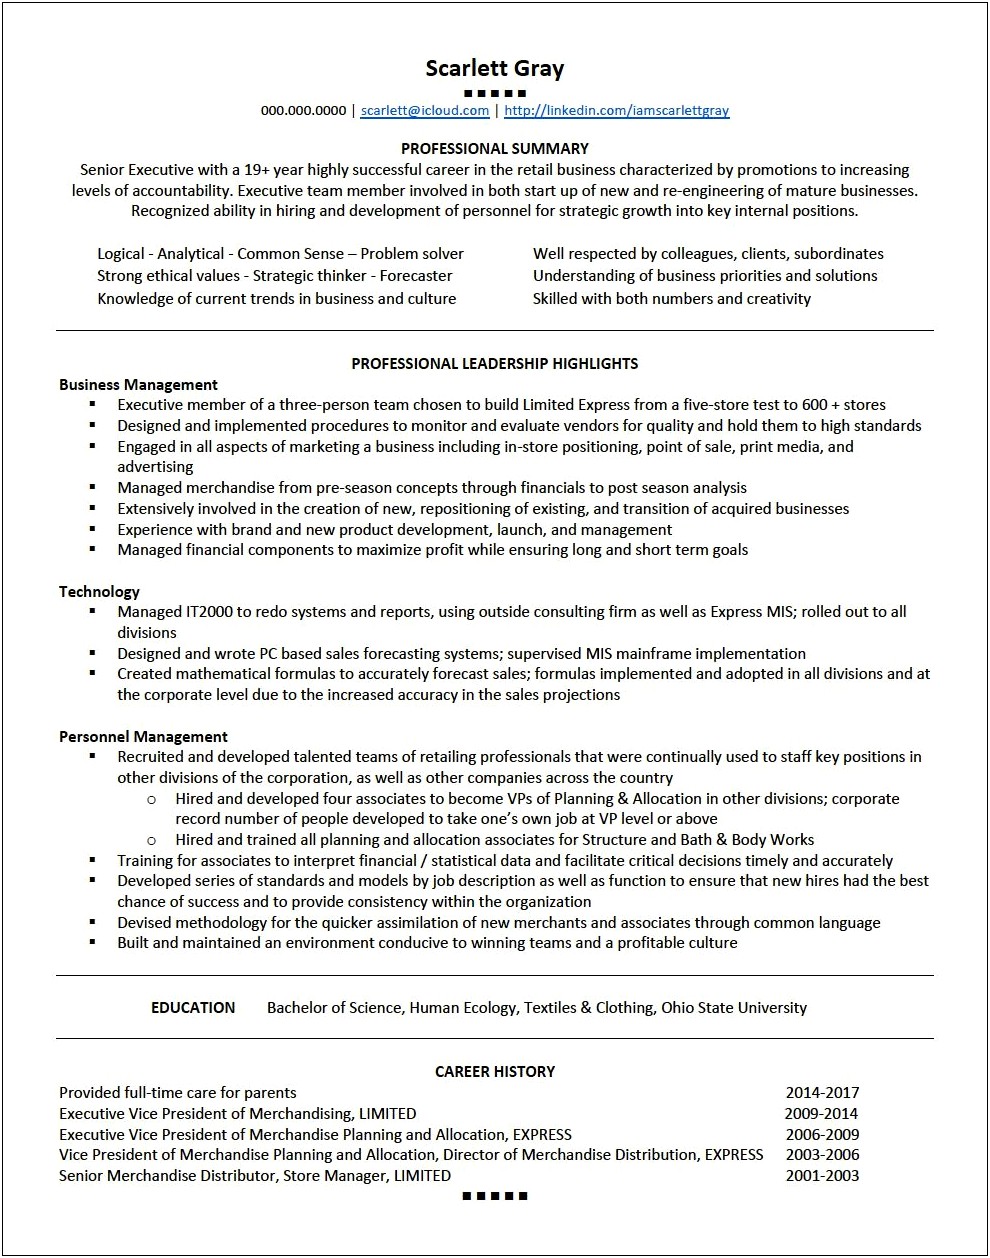 Swarthmore Career Services Resume And Cover Letter